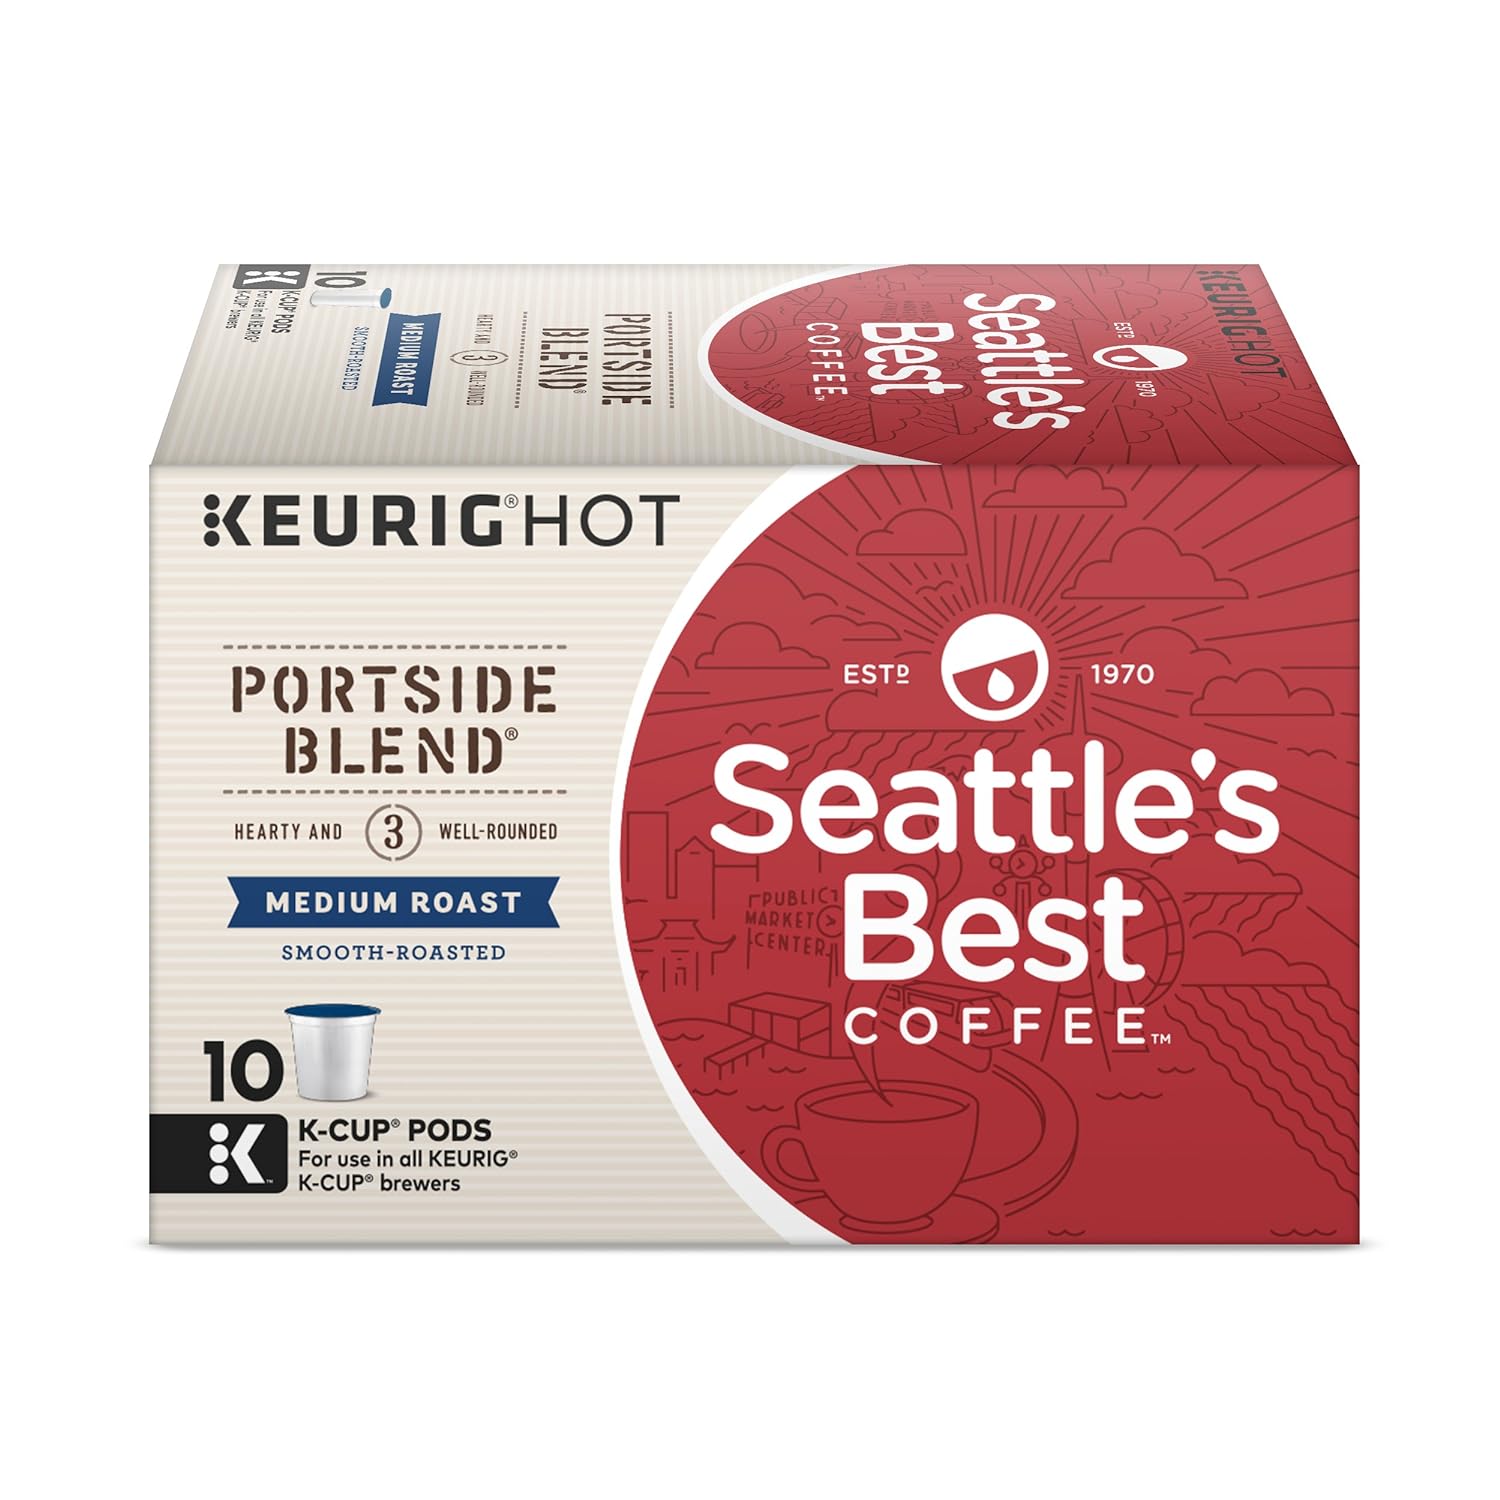 Ive tried many Kcups brands and this has a good taste. Happy with the purchase.